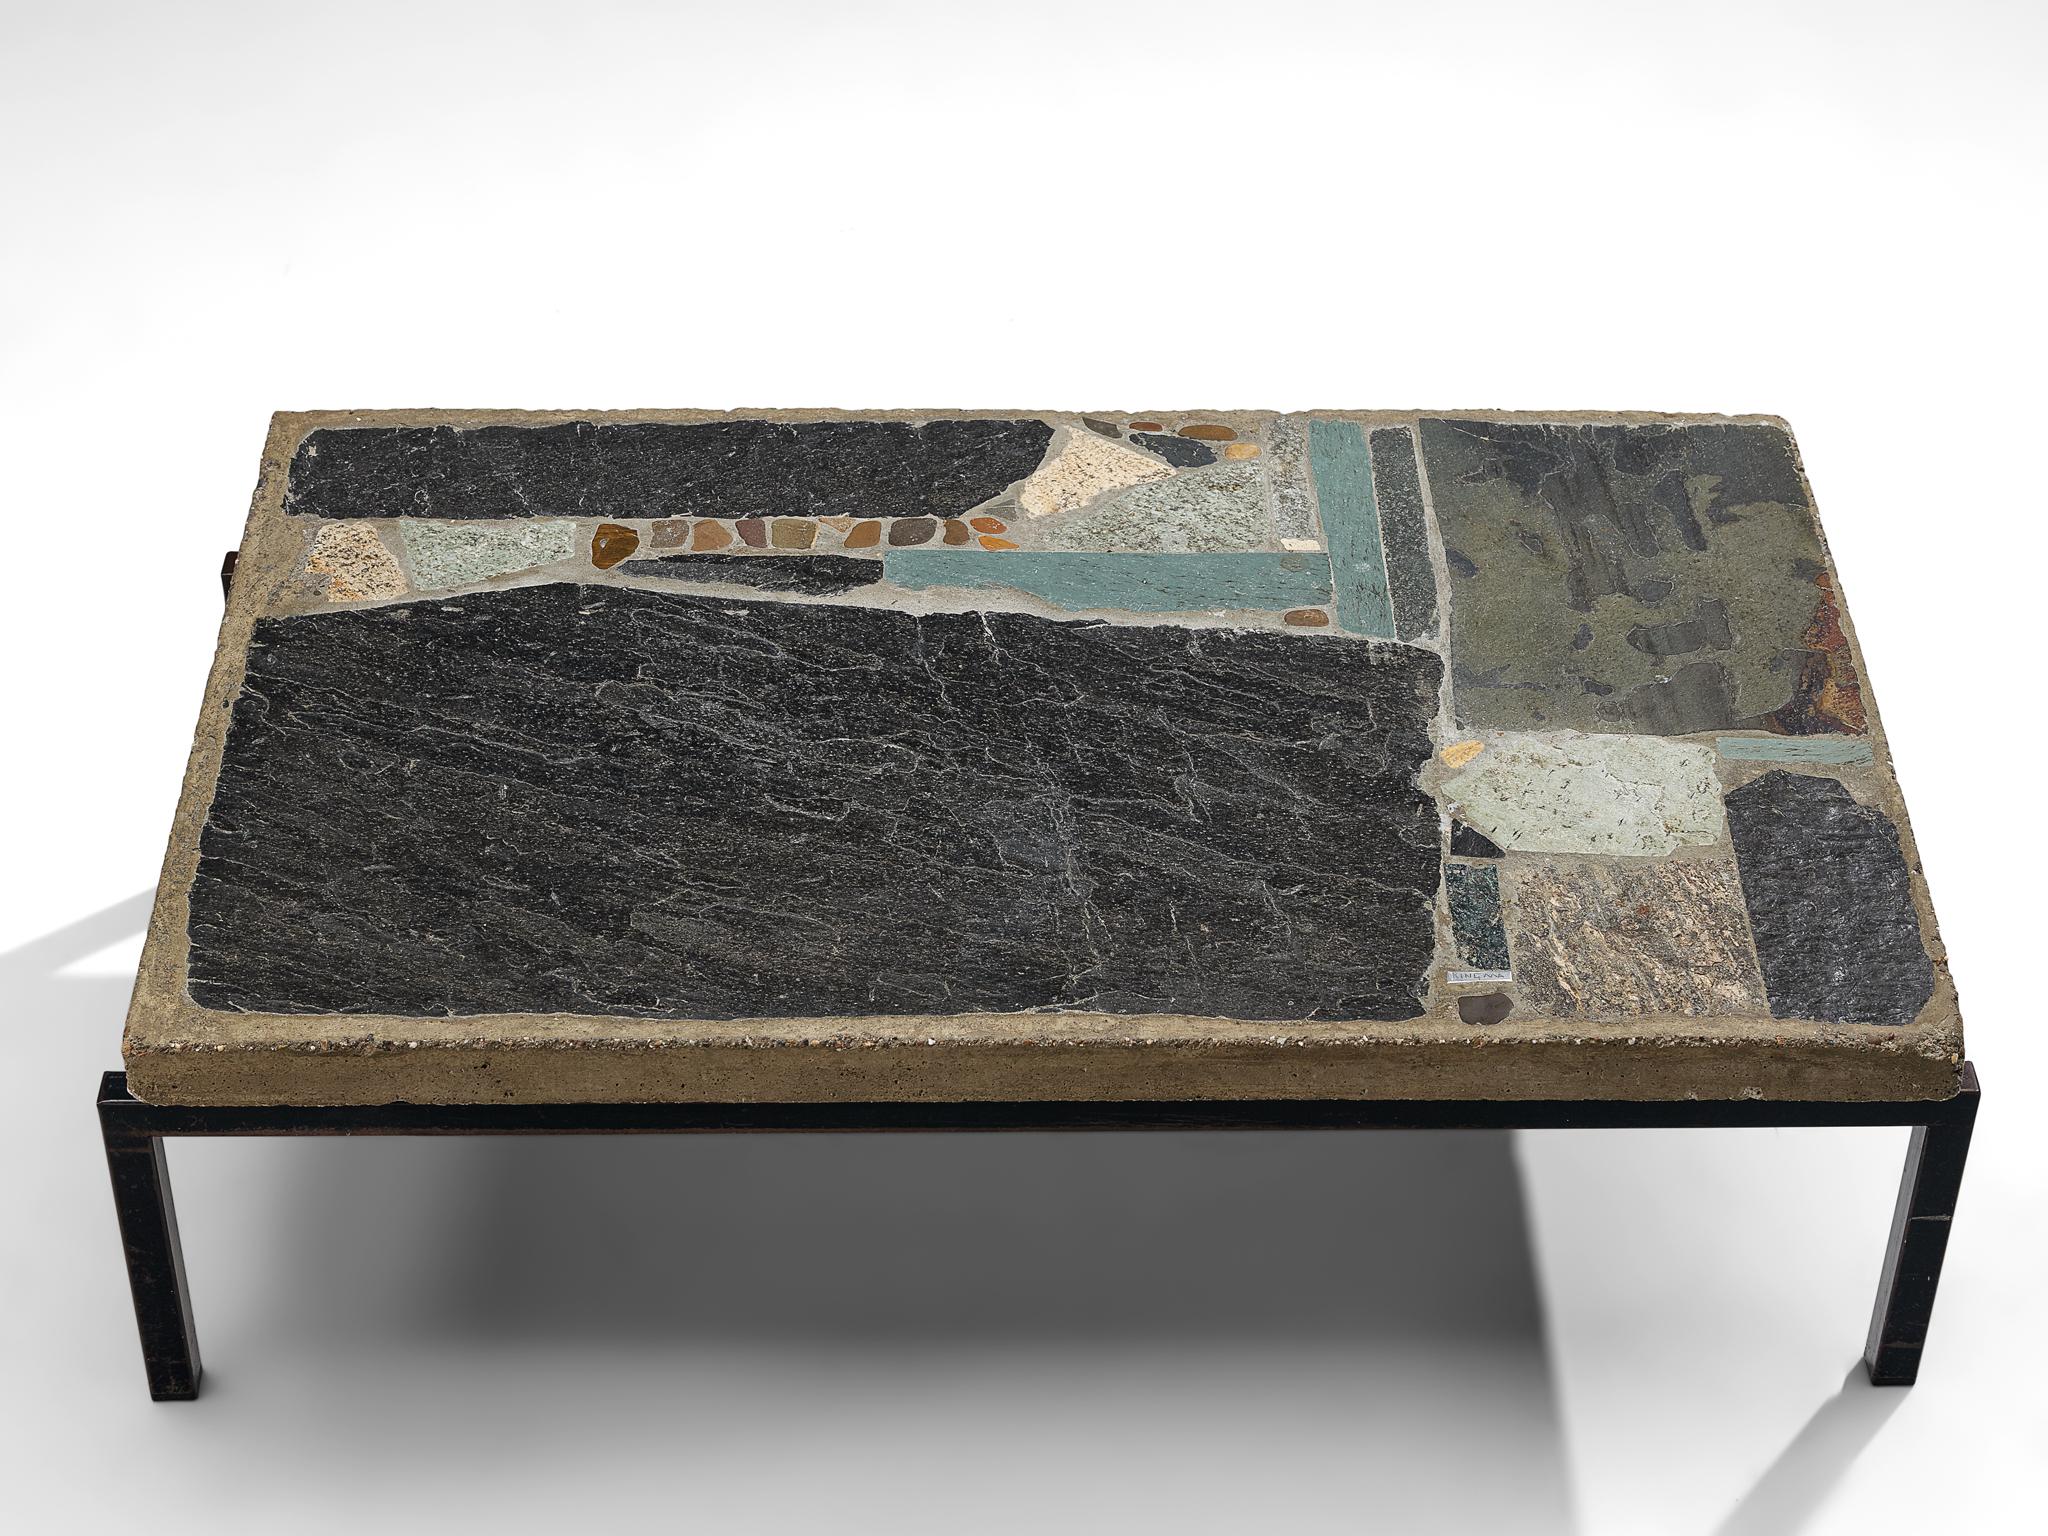 Paul Kingma, slate and ceramic tile coffee table, Netherlands, 1980s.

Abstract design of metals, slate and other stones, set into concrete panel. The different materials create a beautiful and organic mosaic.

Paul Kingma was a Dutch sculptor,